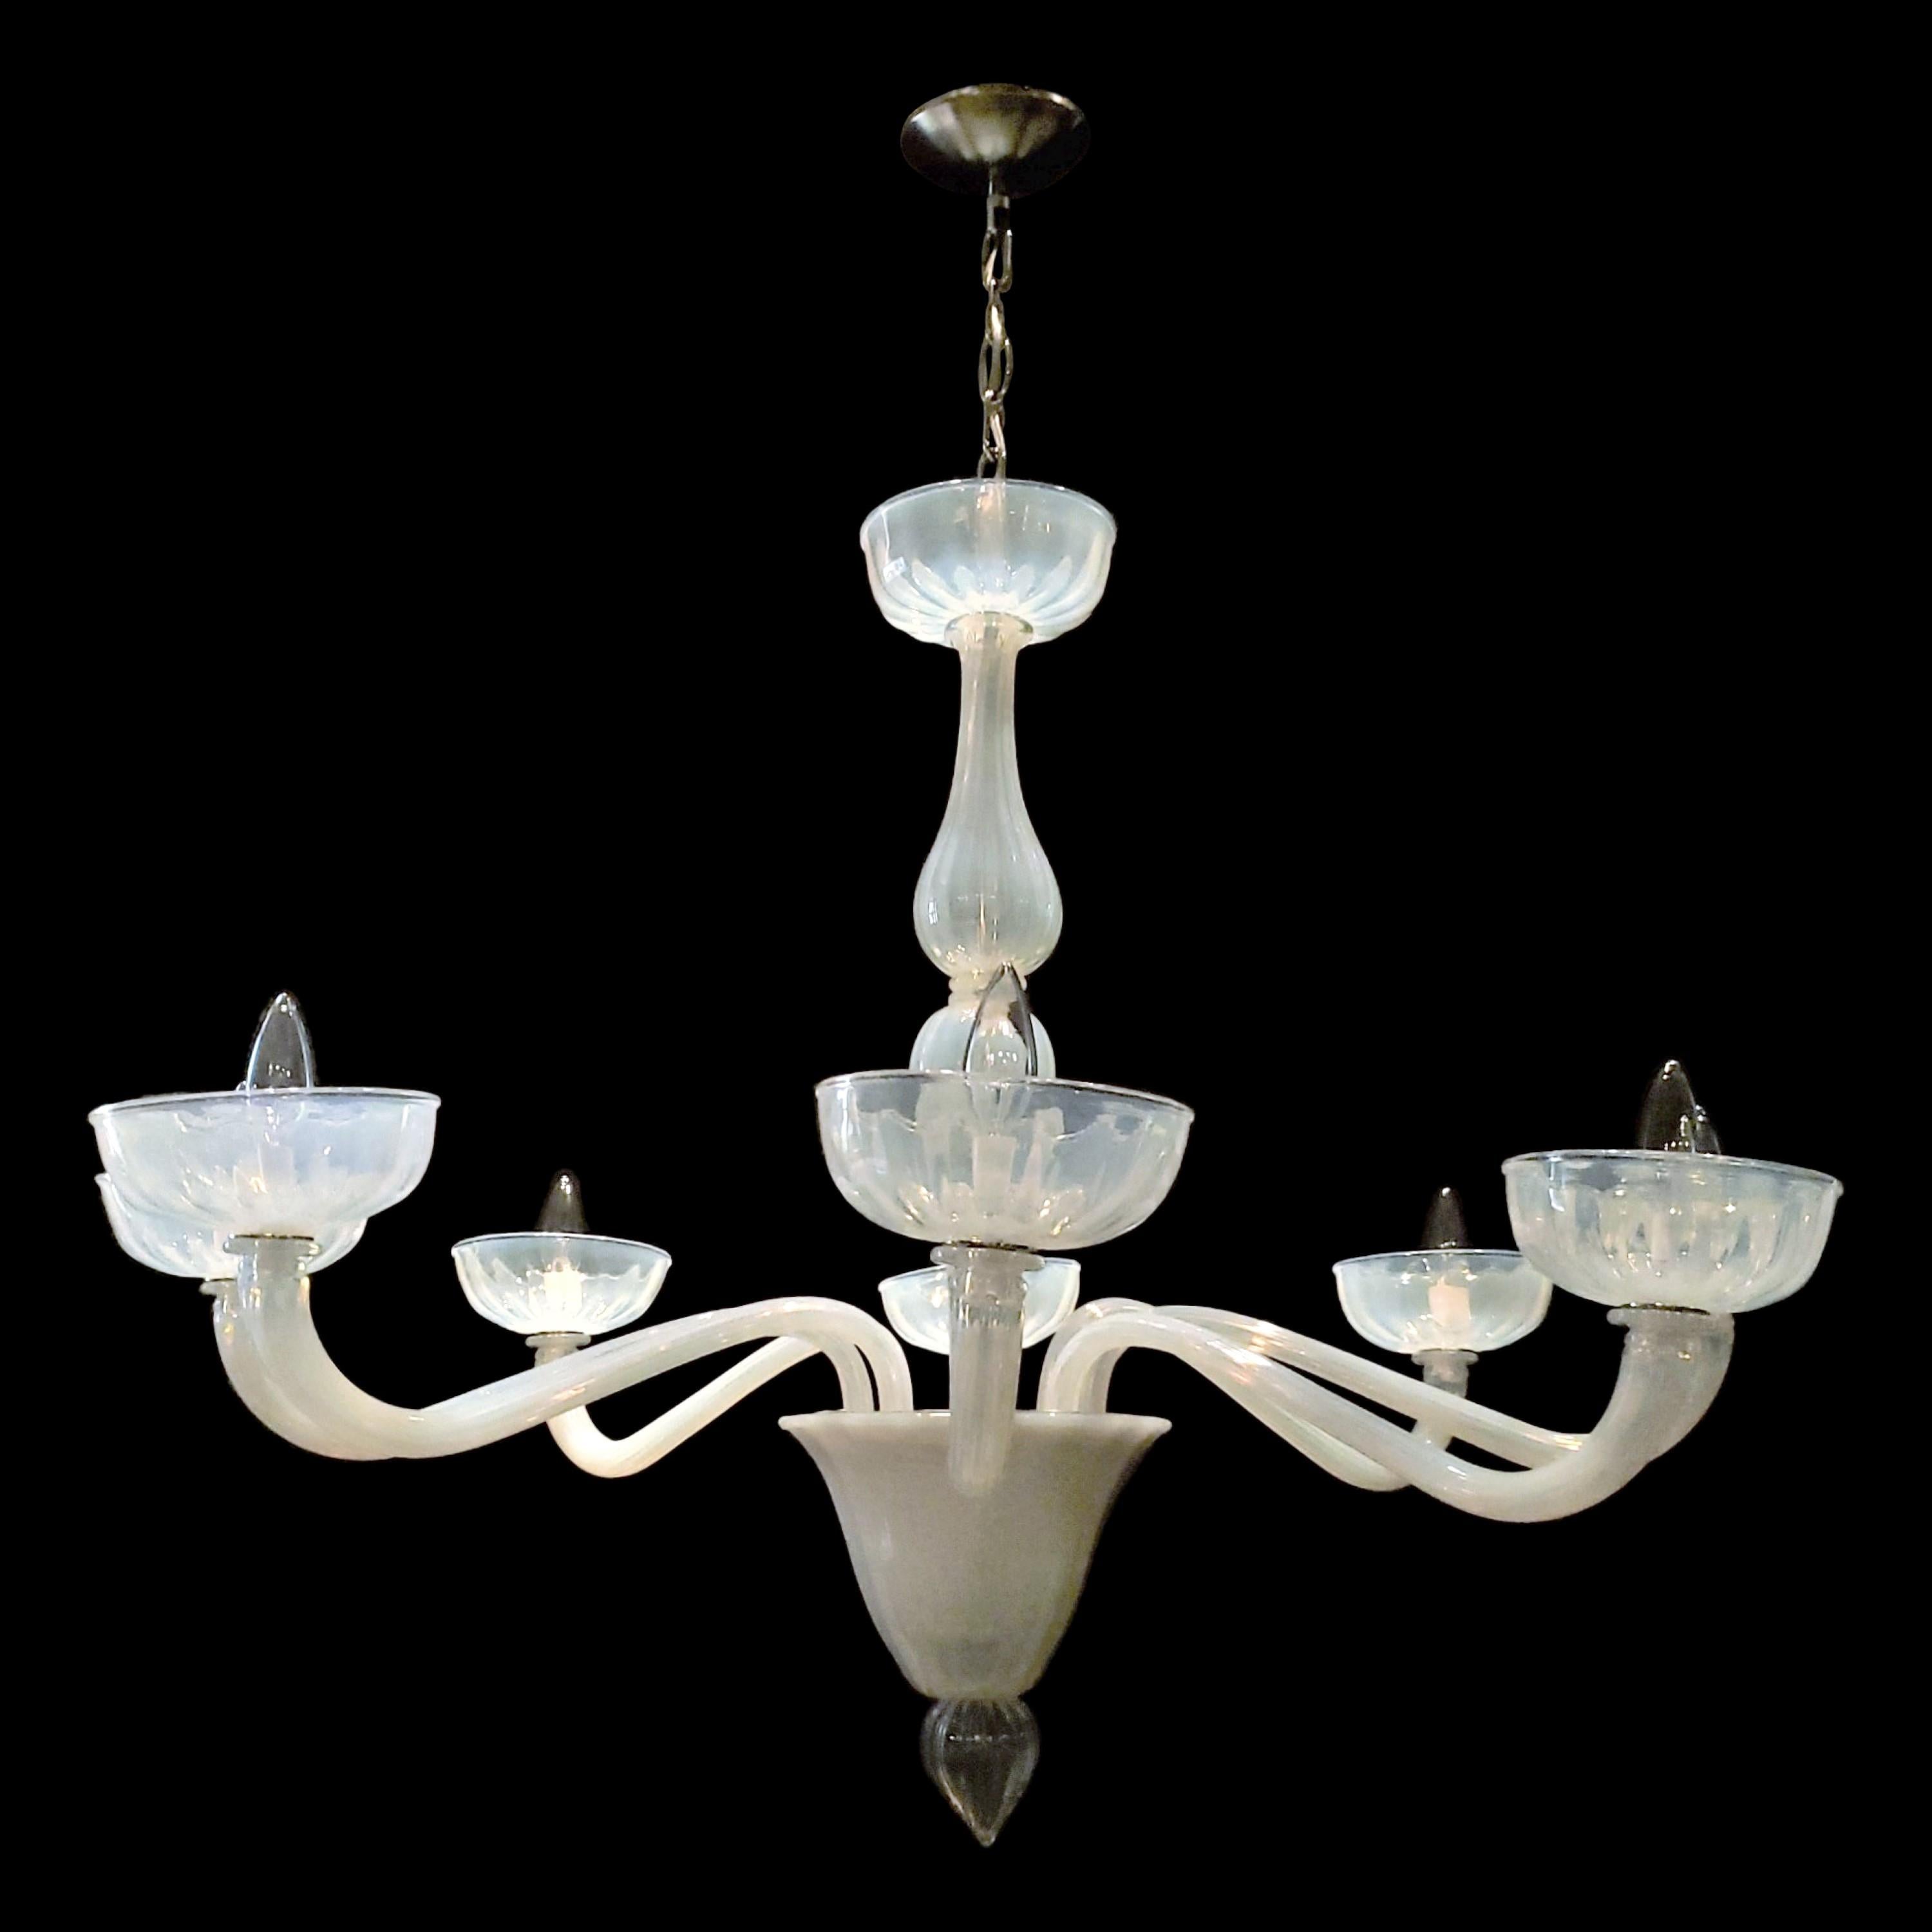 Large scale opaline Murano glass eight arm chandelier. This comes rewired and ready to install. Ships disassembled. Cleaned and restored. Please note, this item is located in our Scranton, PA location.